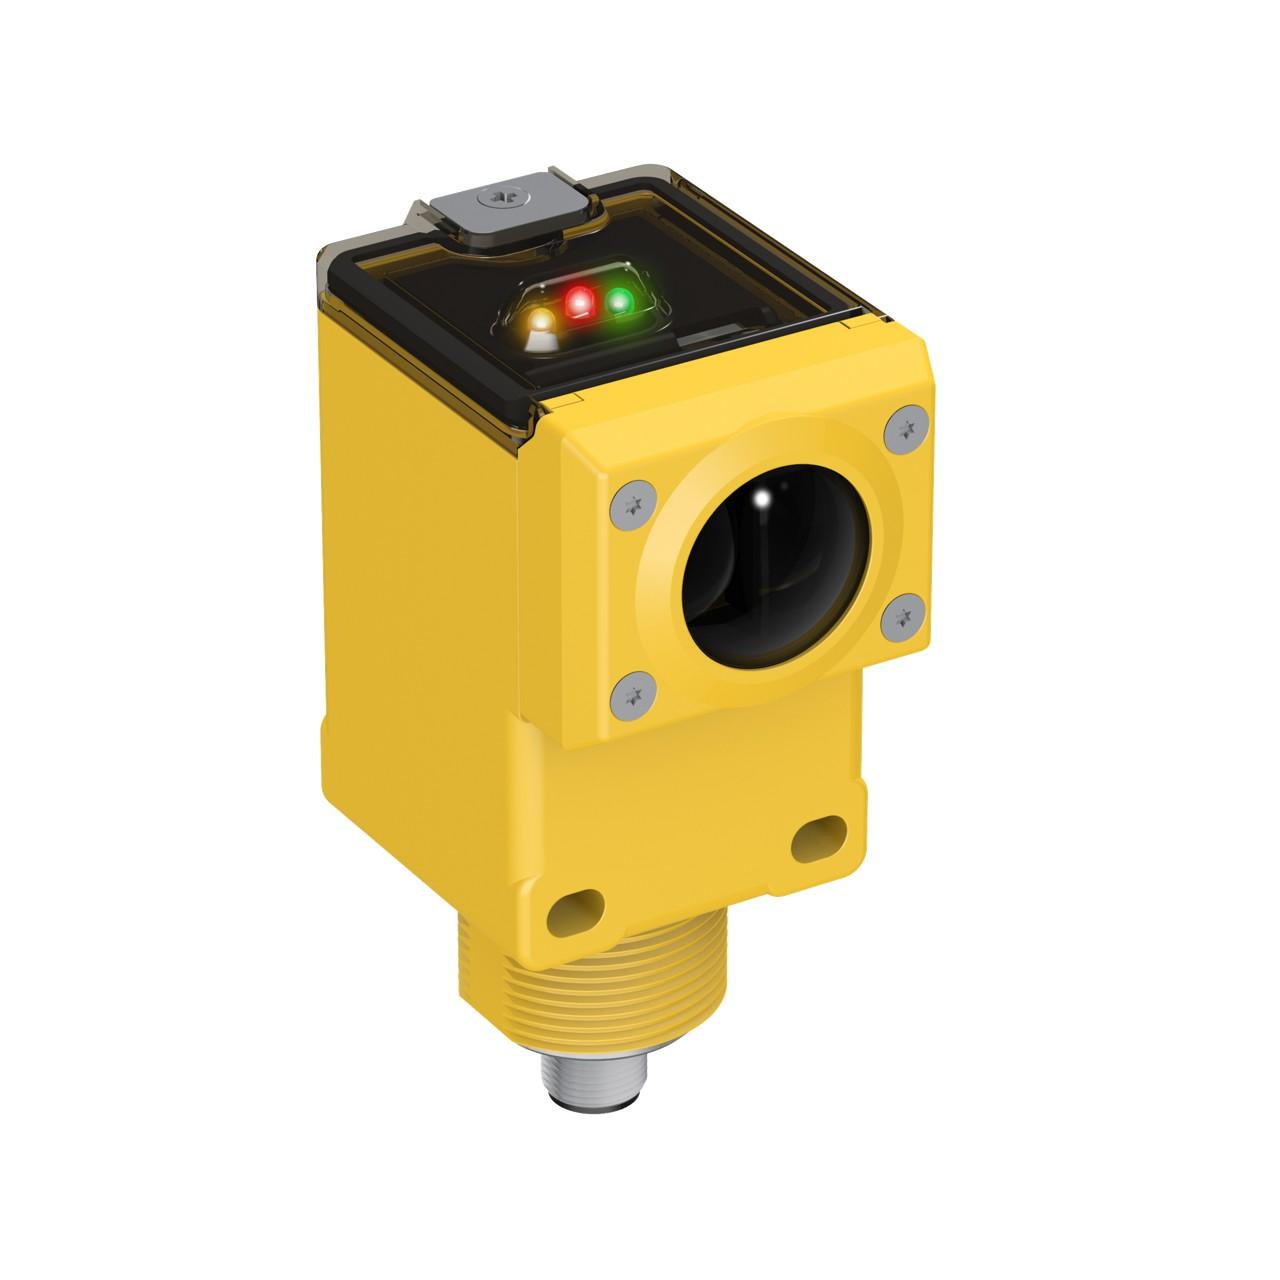 Banner Q45AD9CV4Q Intrinsically-safe photo-electric sensor with convergent mode - Banner Engineering (Q series - Q45AD9) - Part #37634 - Sensing range 100mm - Visible red light (680nm) - 1 x digital output (NAMUR) (Light-ON or Dark-ON operation) - Supply voltage 5Vdc-15Vdc